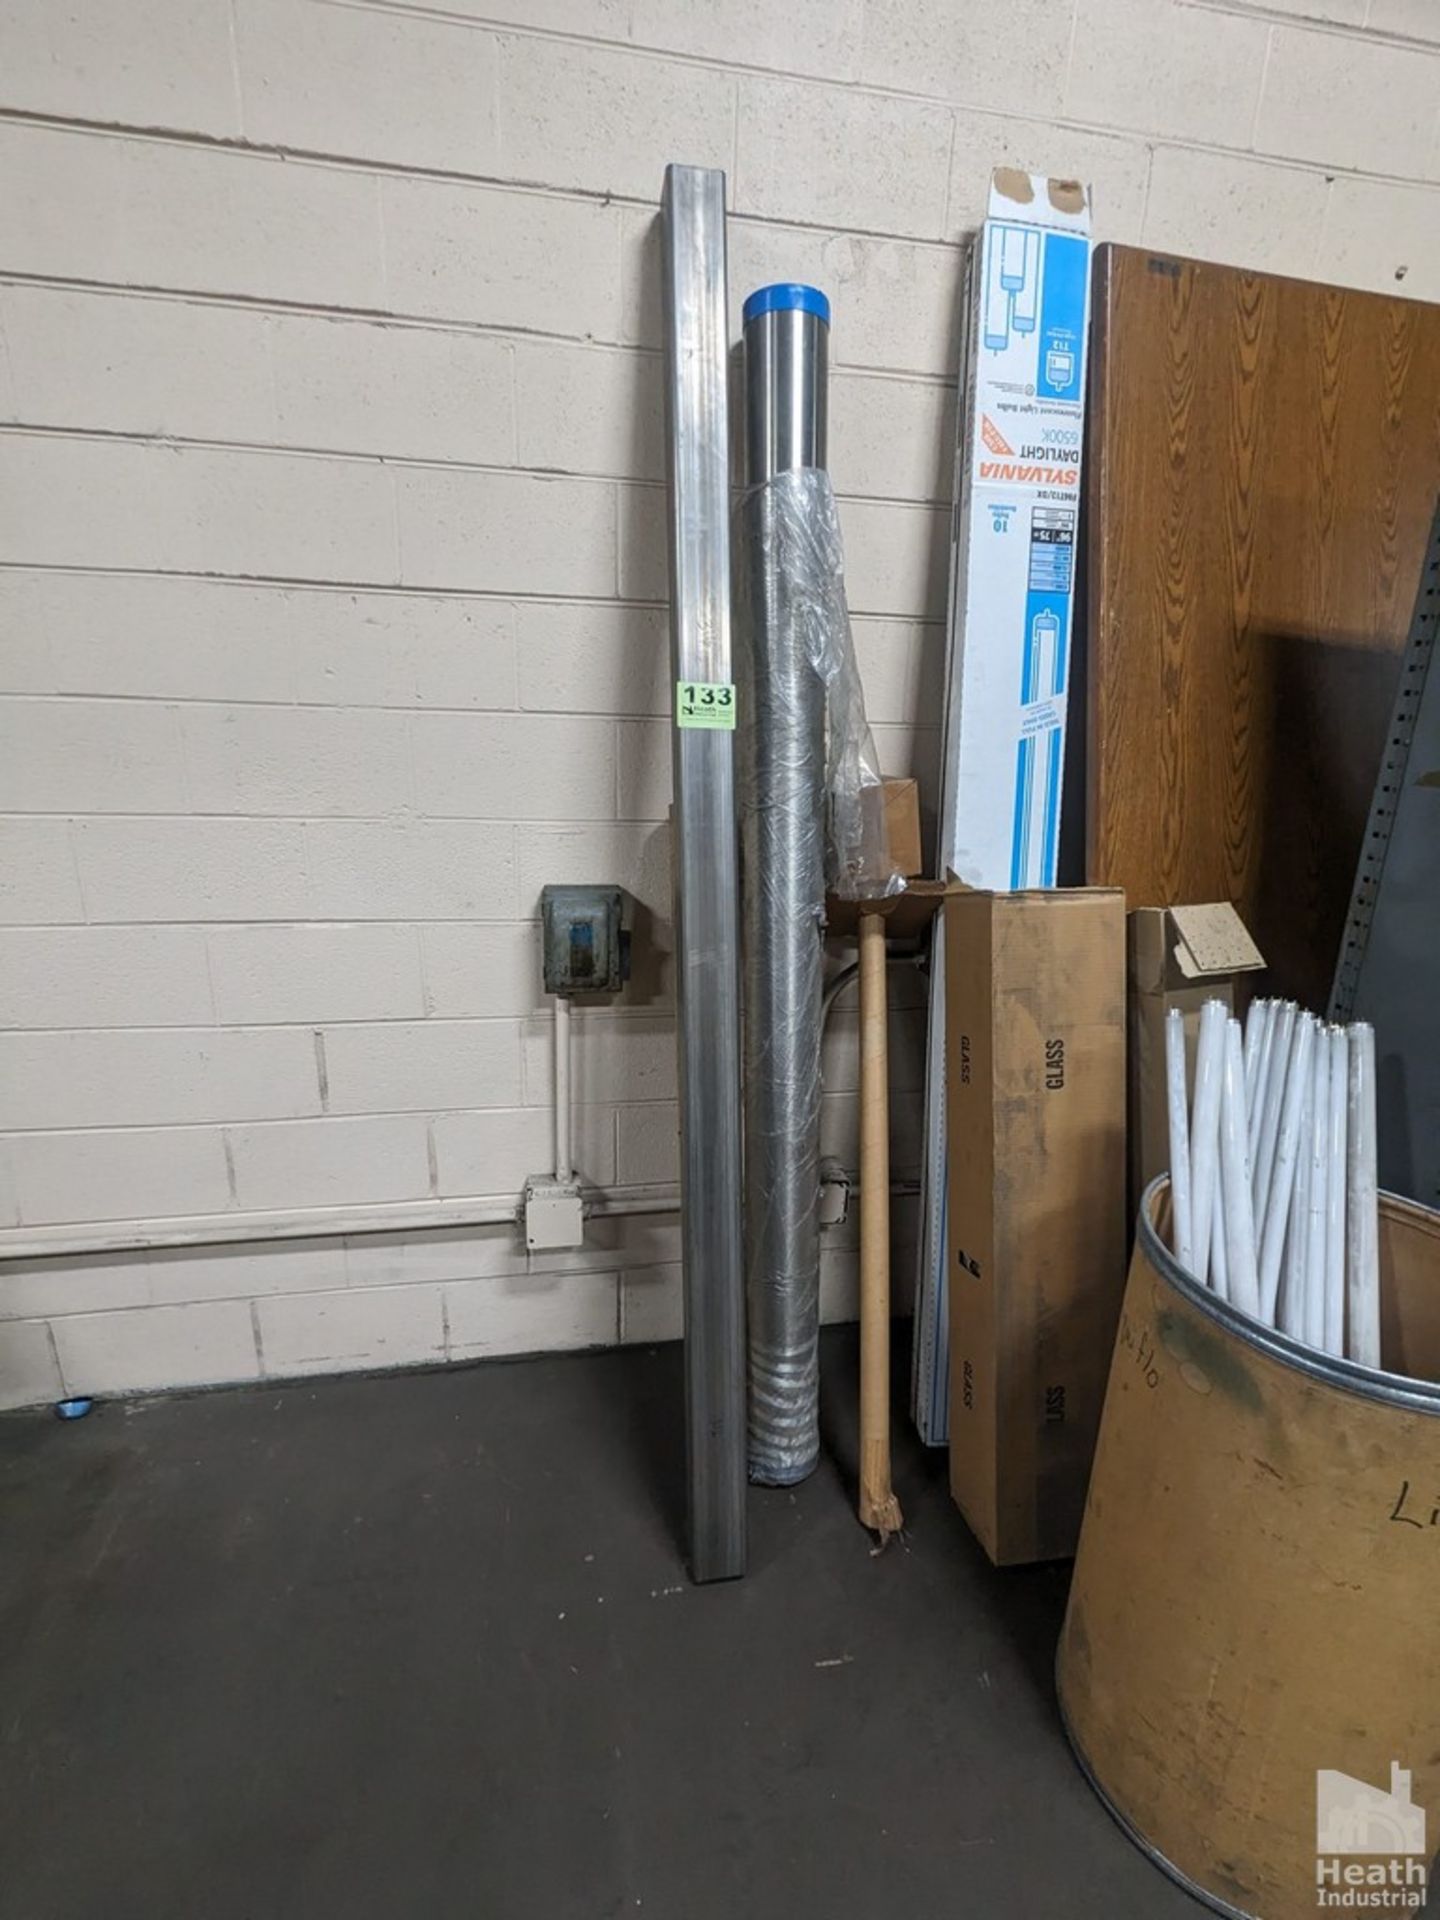 4" X 4" X 8' STAINLESS SQUARE TUBING AND 6" X 90" TUBING (316)